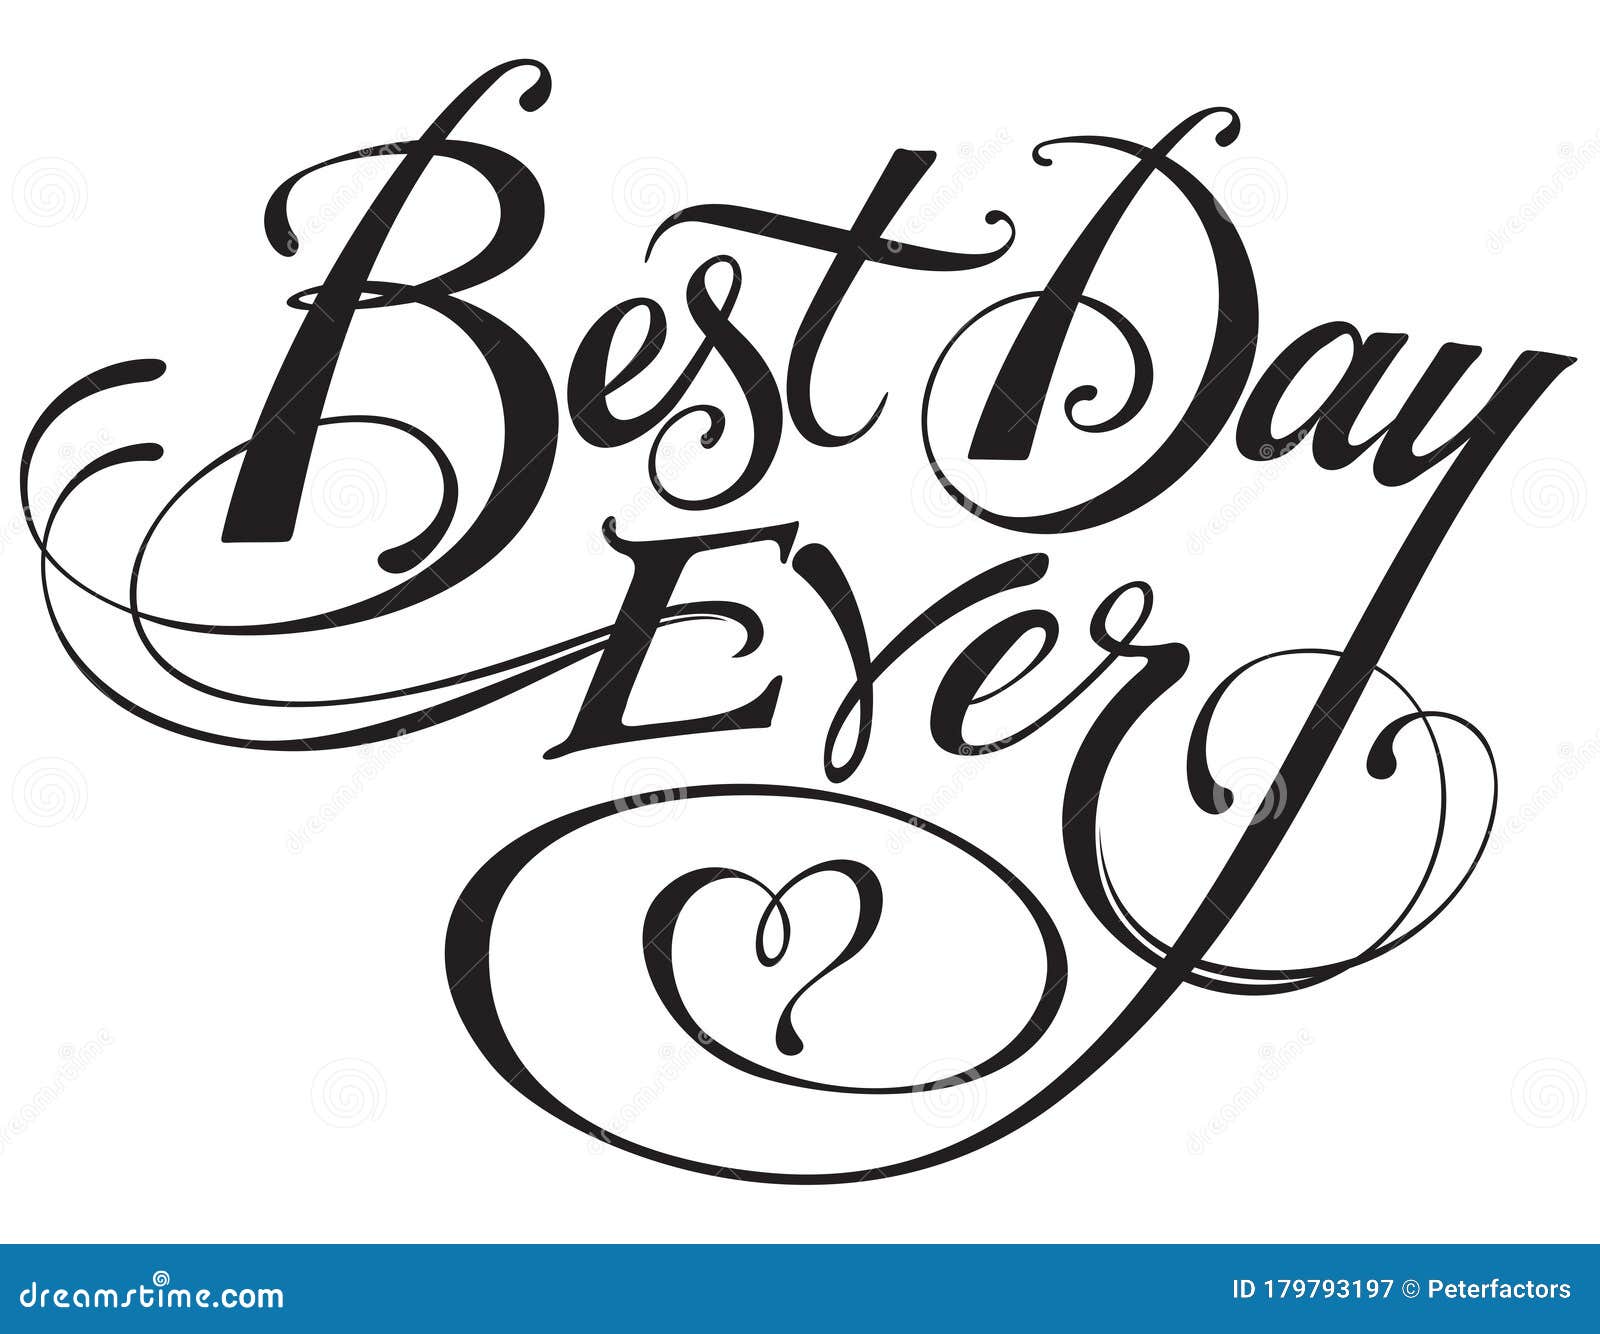 the best day ever creative writing